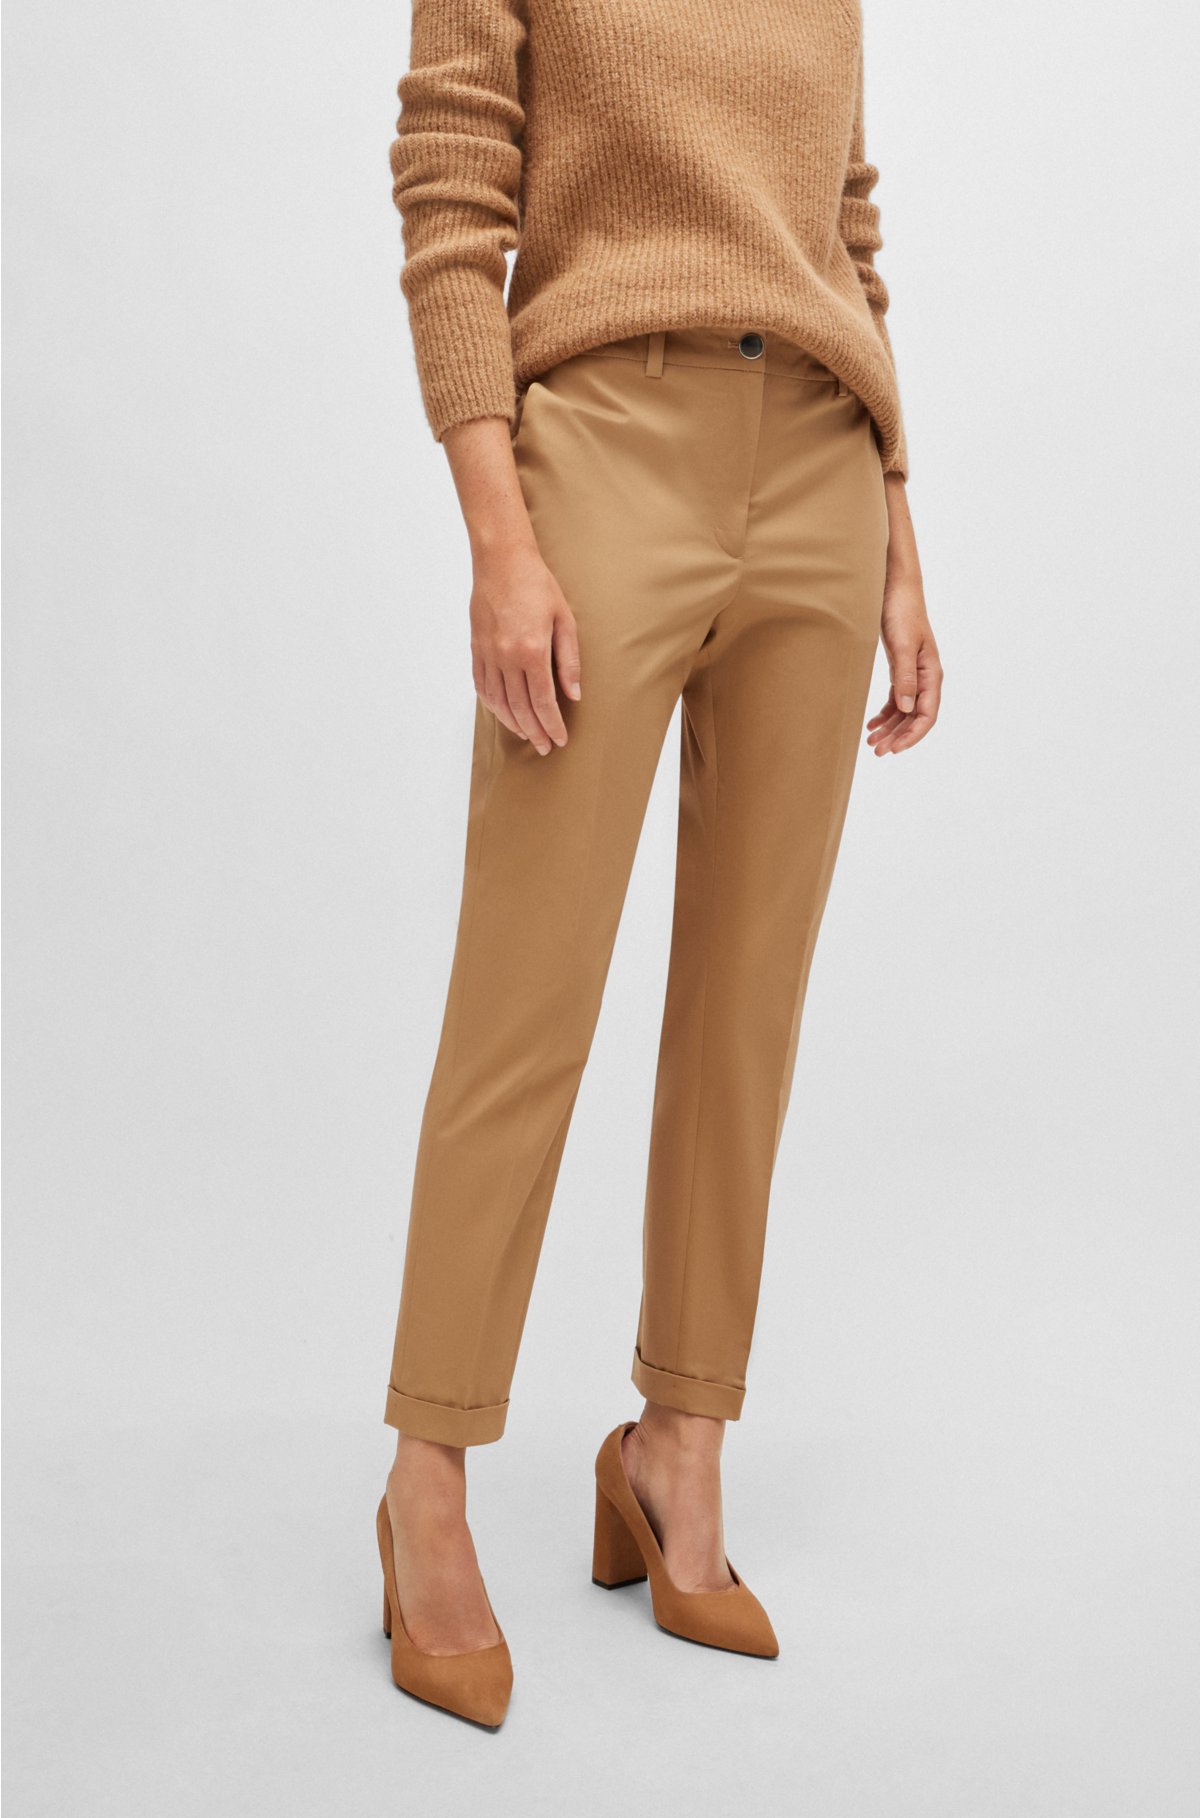 Beige Chino  Tapered Cotton Stretch Trouser - ASKET